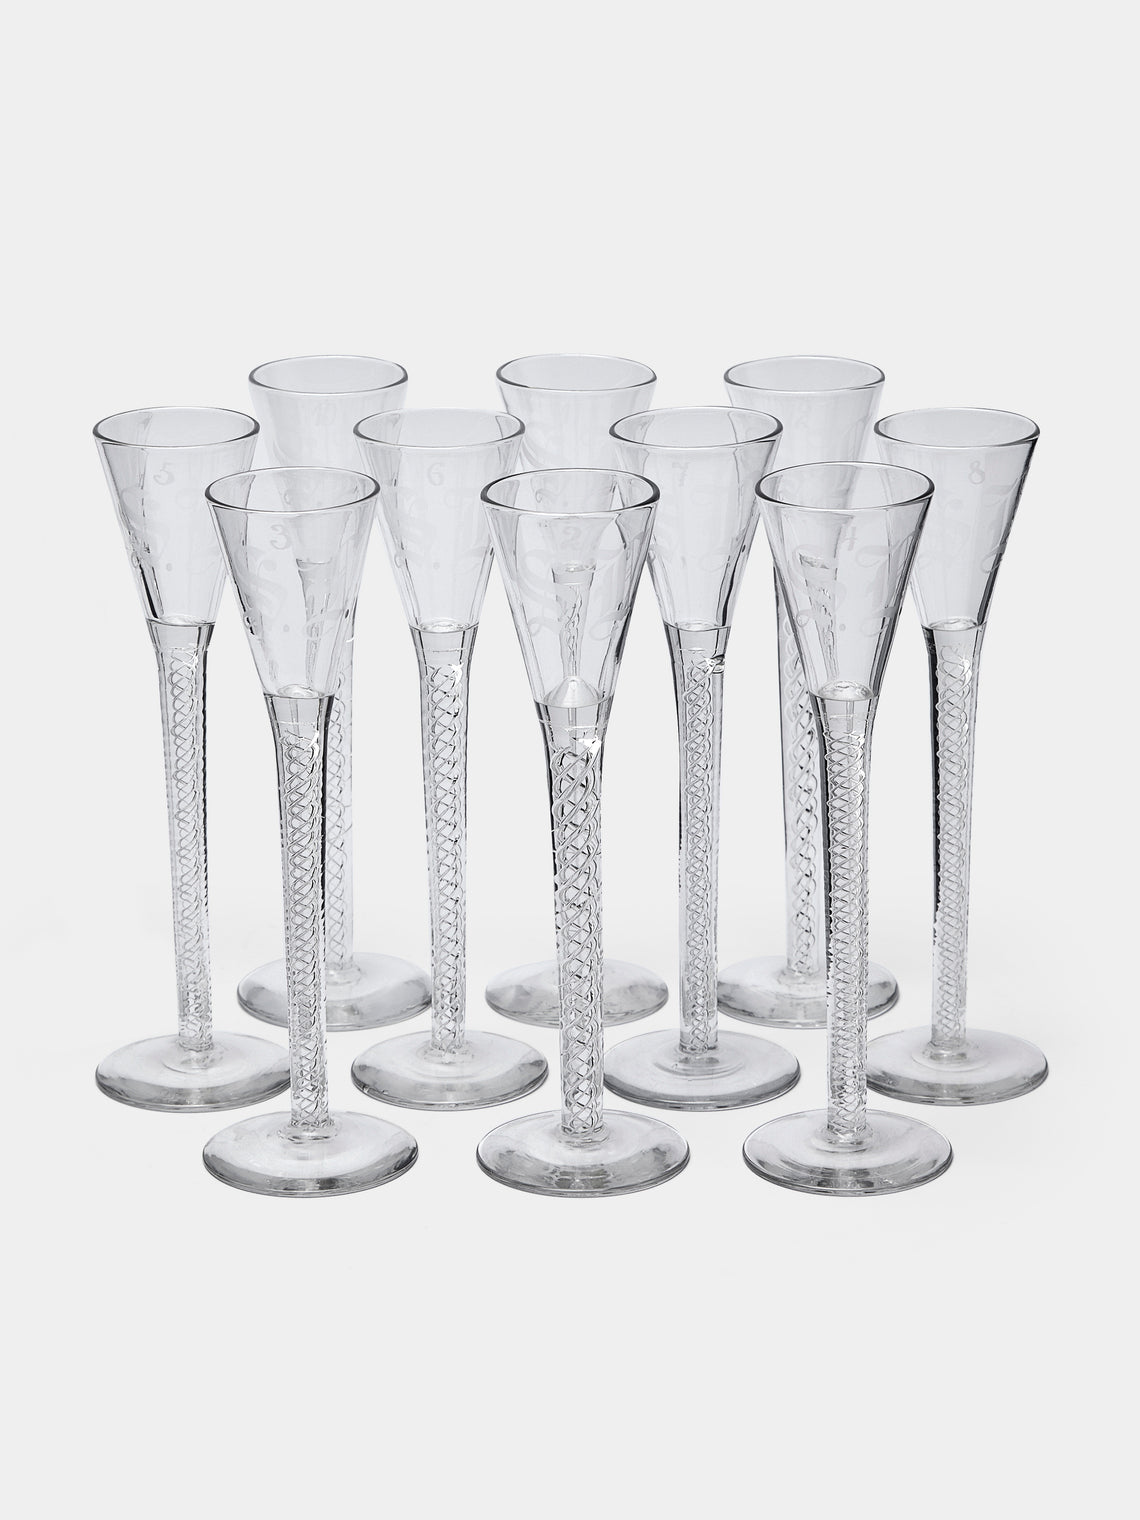 Antique and Vintage - 20th-Century Crystal Snaps Glasses (Set of 10) - Clear - ABASK - 